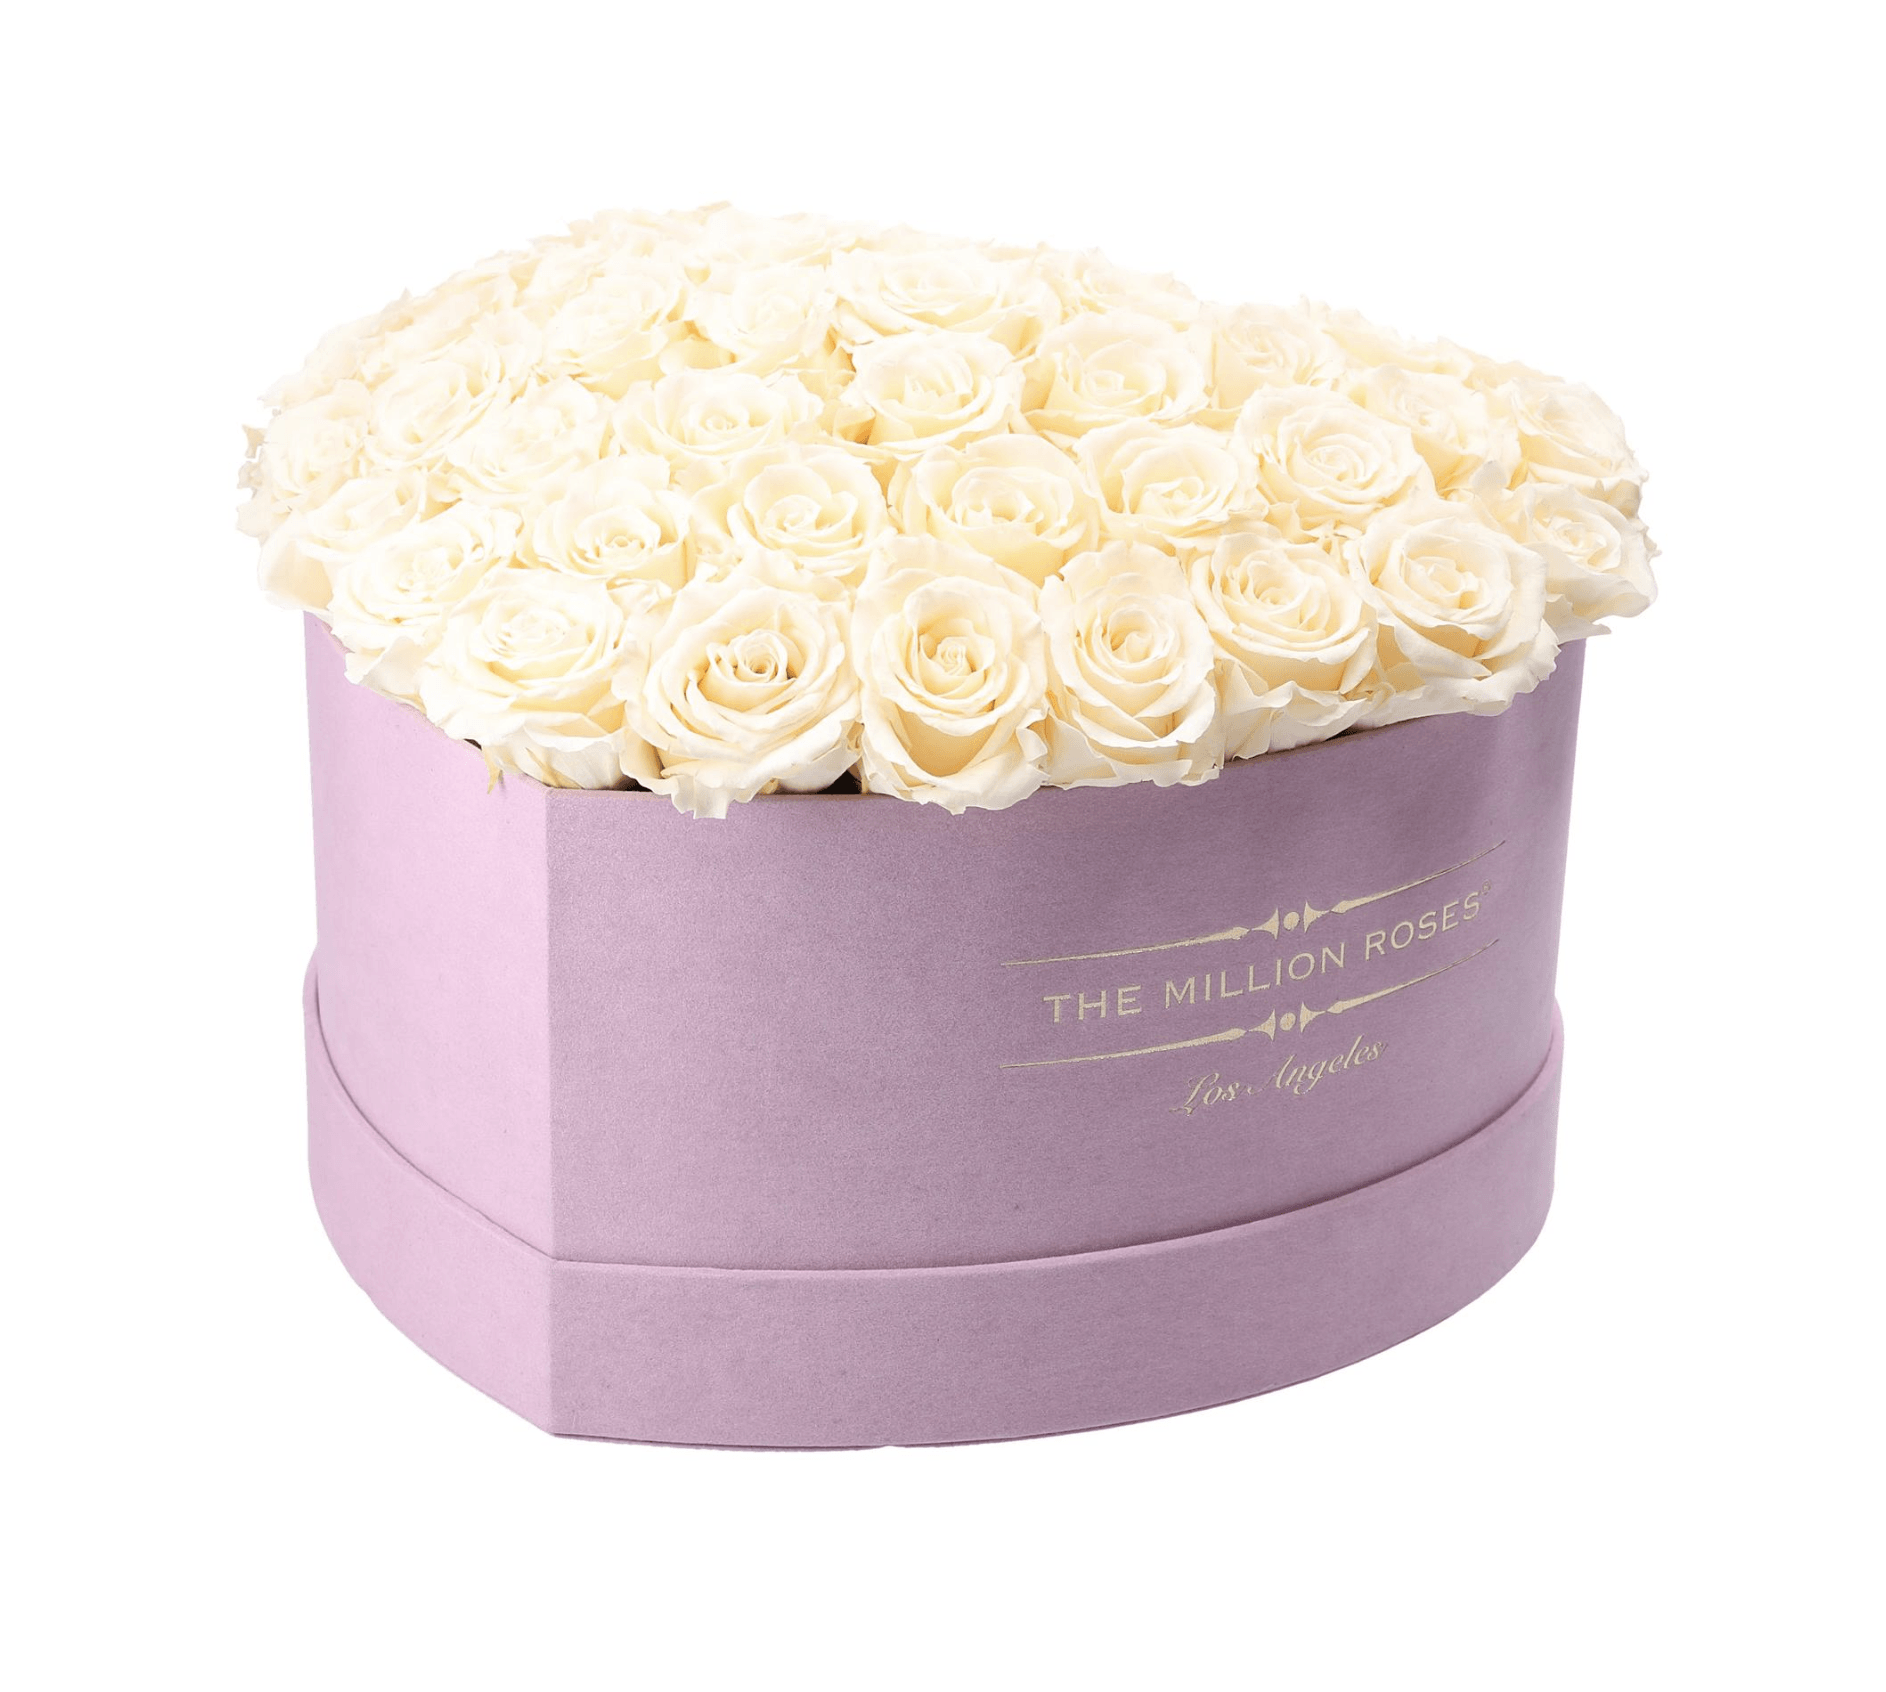 the million LOVE+ - glamour light-pink suede box - ivory (dome) ETERNITY roses ivory eternity roses - the million roses